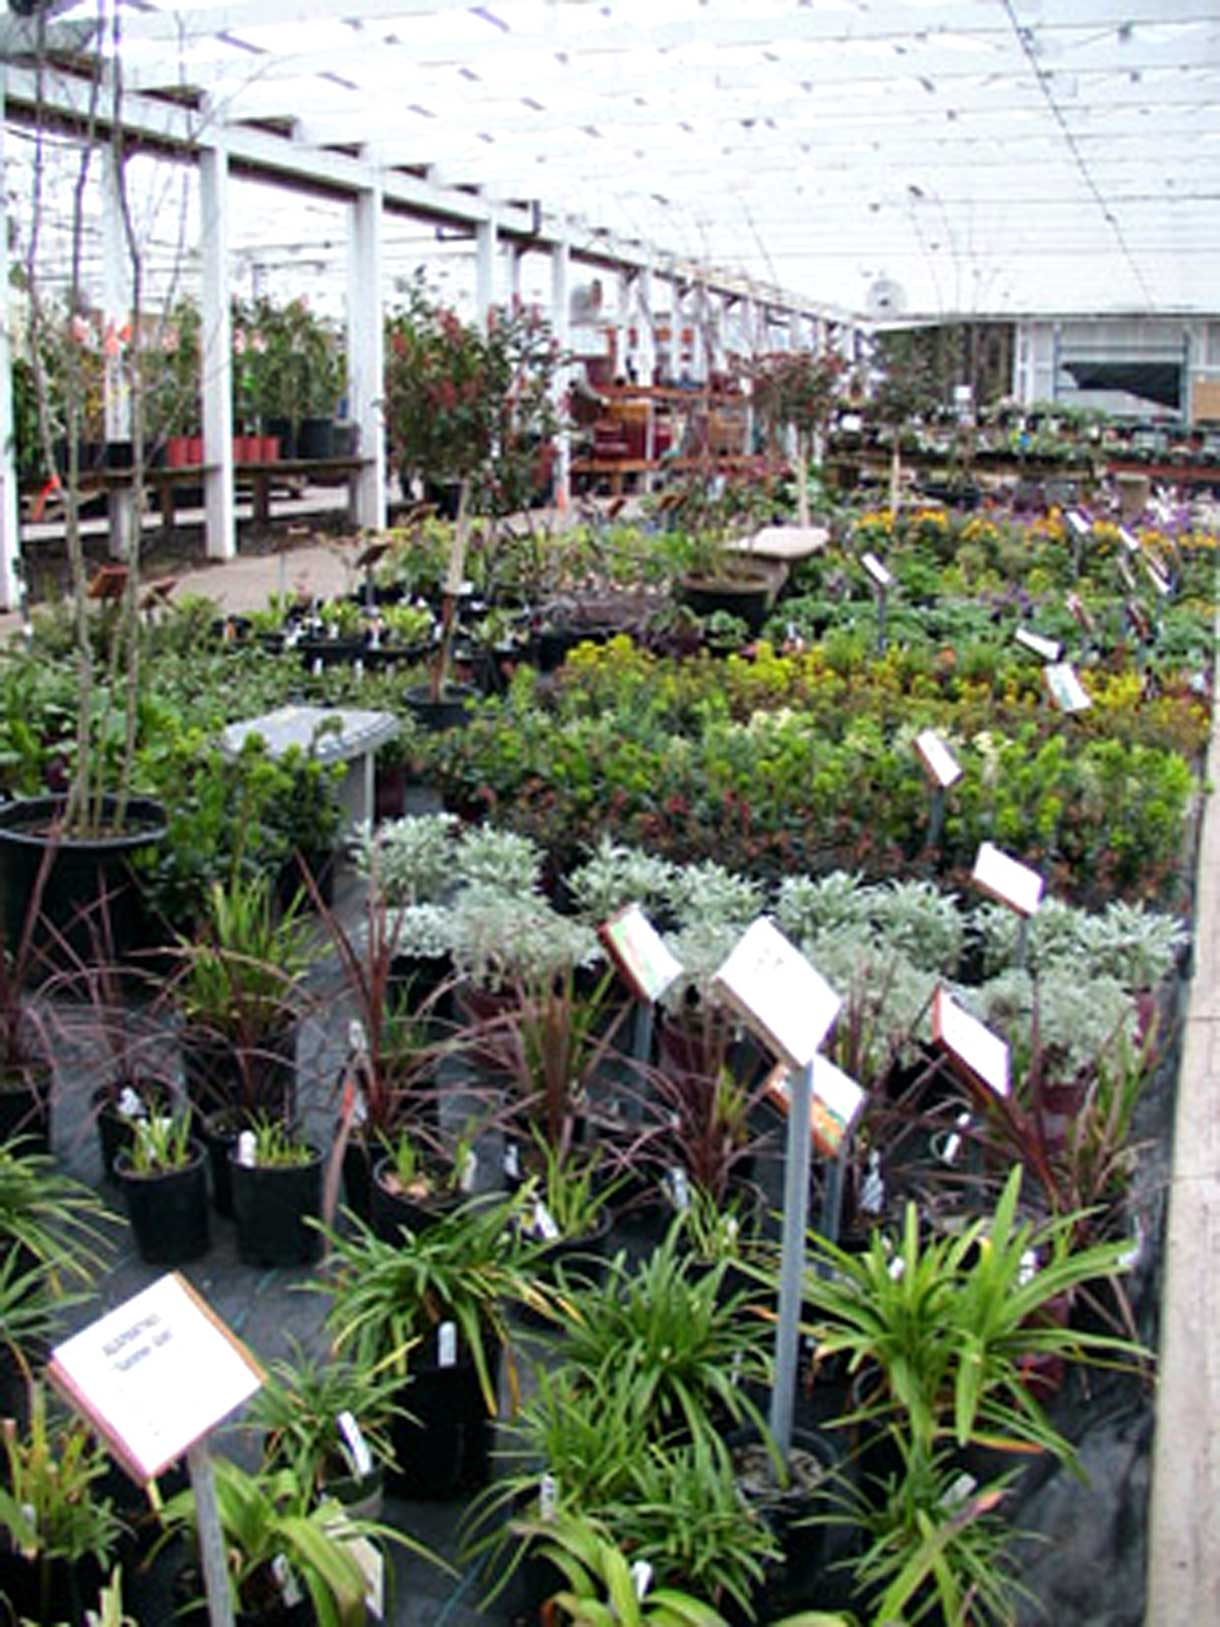 A large selection of perennials and other plants at Bark and Garden Center.